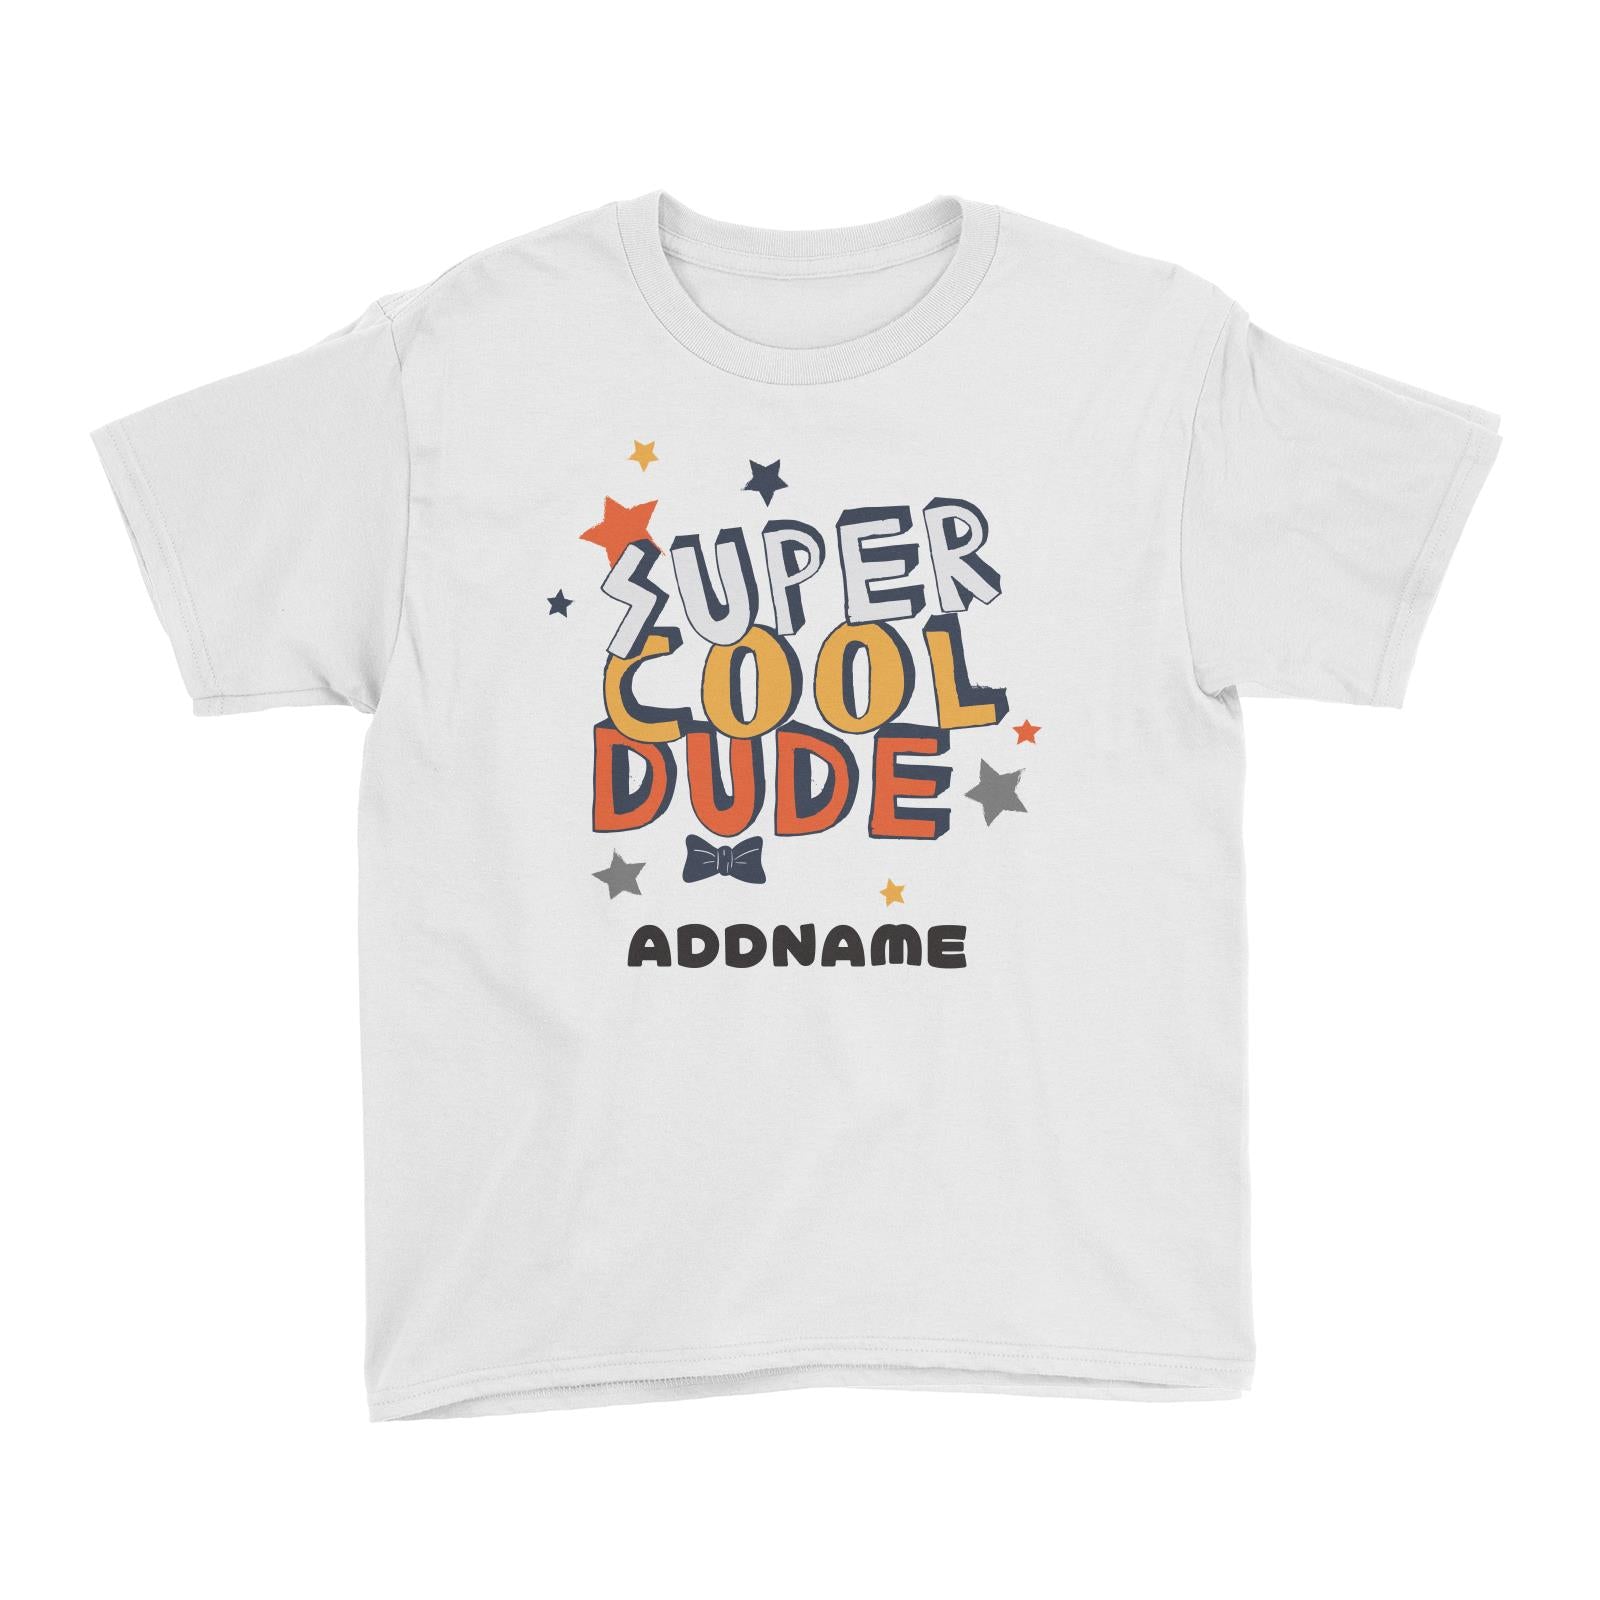 Super Cool Dude with Bow Tie Addname White Kid's T-Shirt